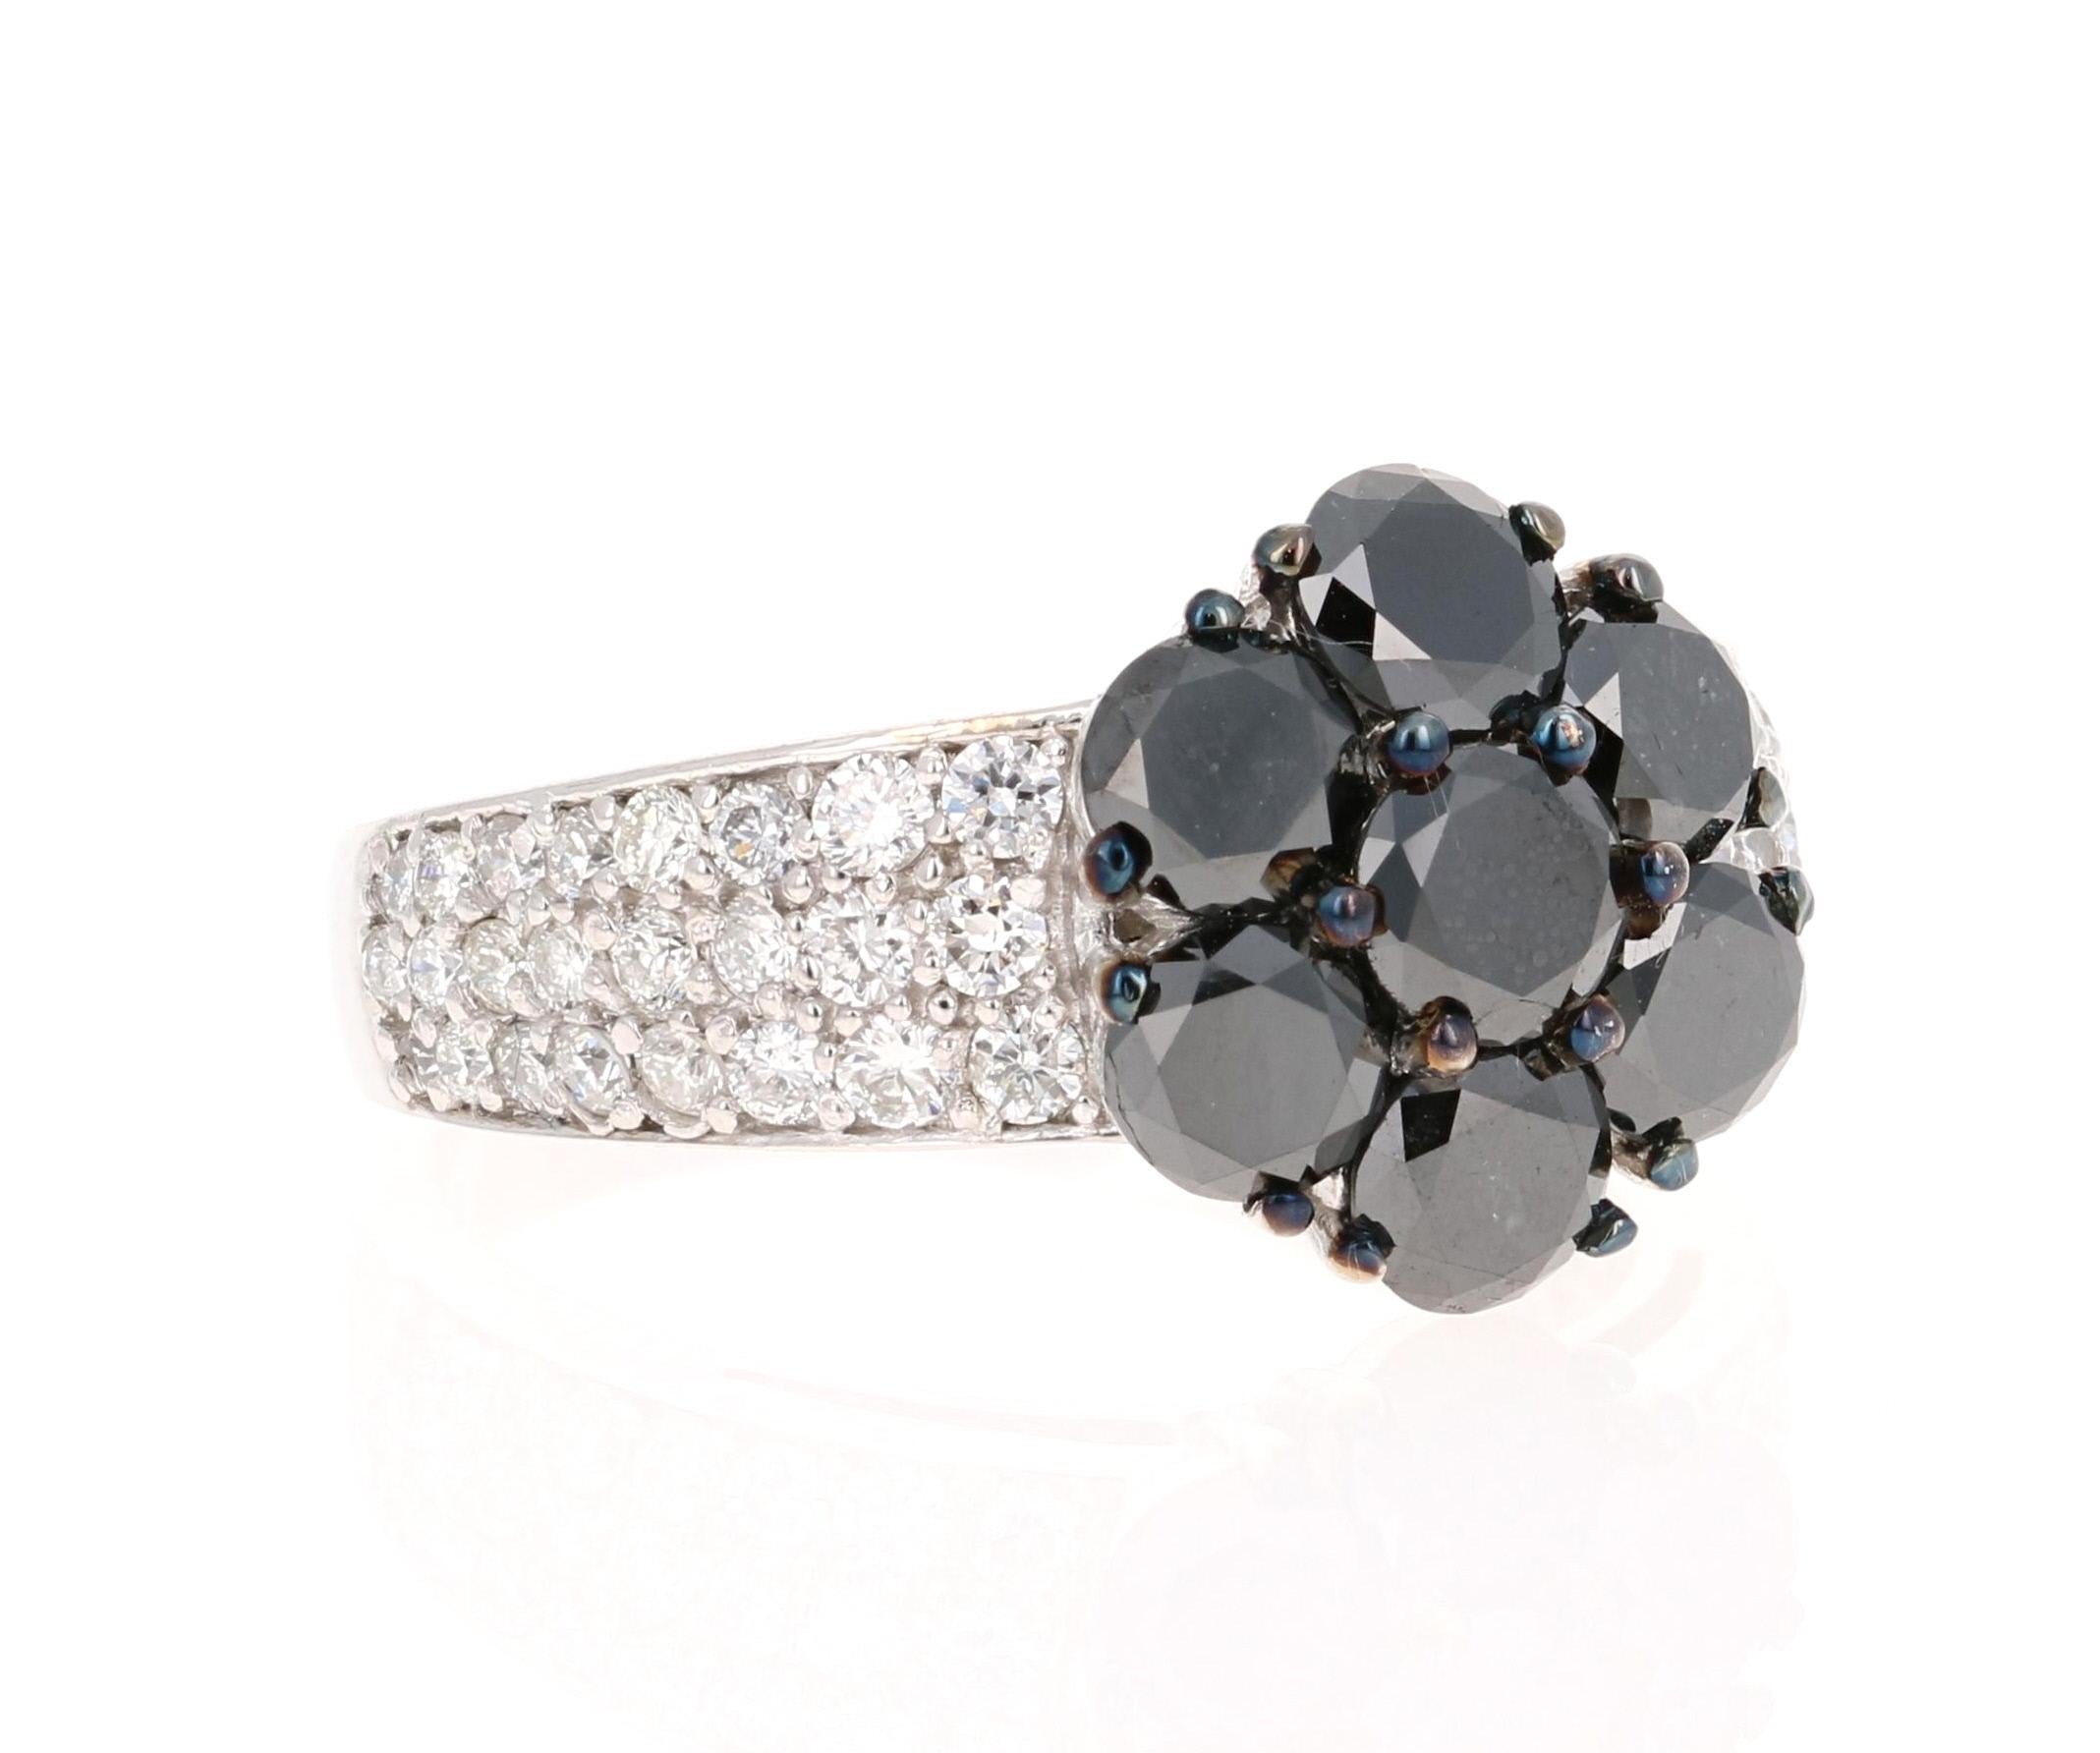 There are 7 Black Round Cut Diamonds that weigh 2.17 Carats and they are surrounded by 48 Round Cut Diamonds that weigh 0.75 Carats. 
The total carat weight of this ring is 2.92 Carats. 
This ring is made in 14K White Gold and weighs approximately